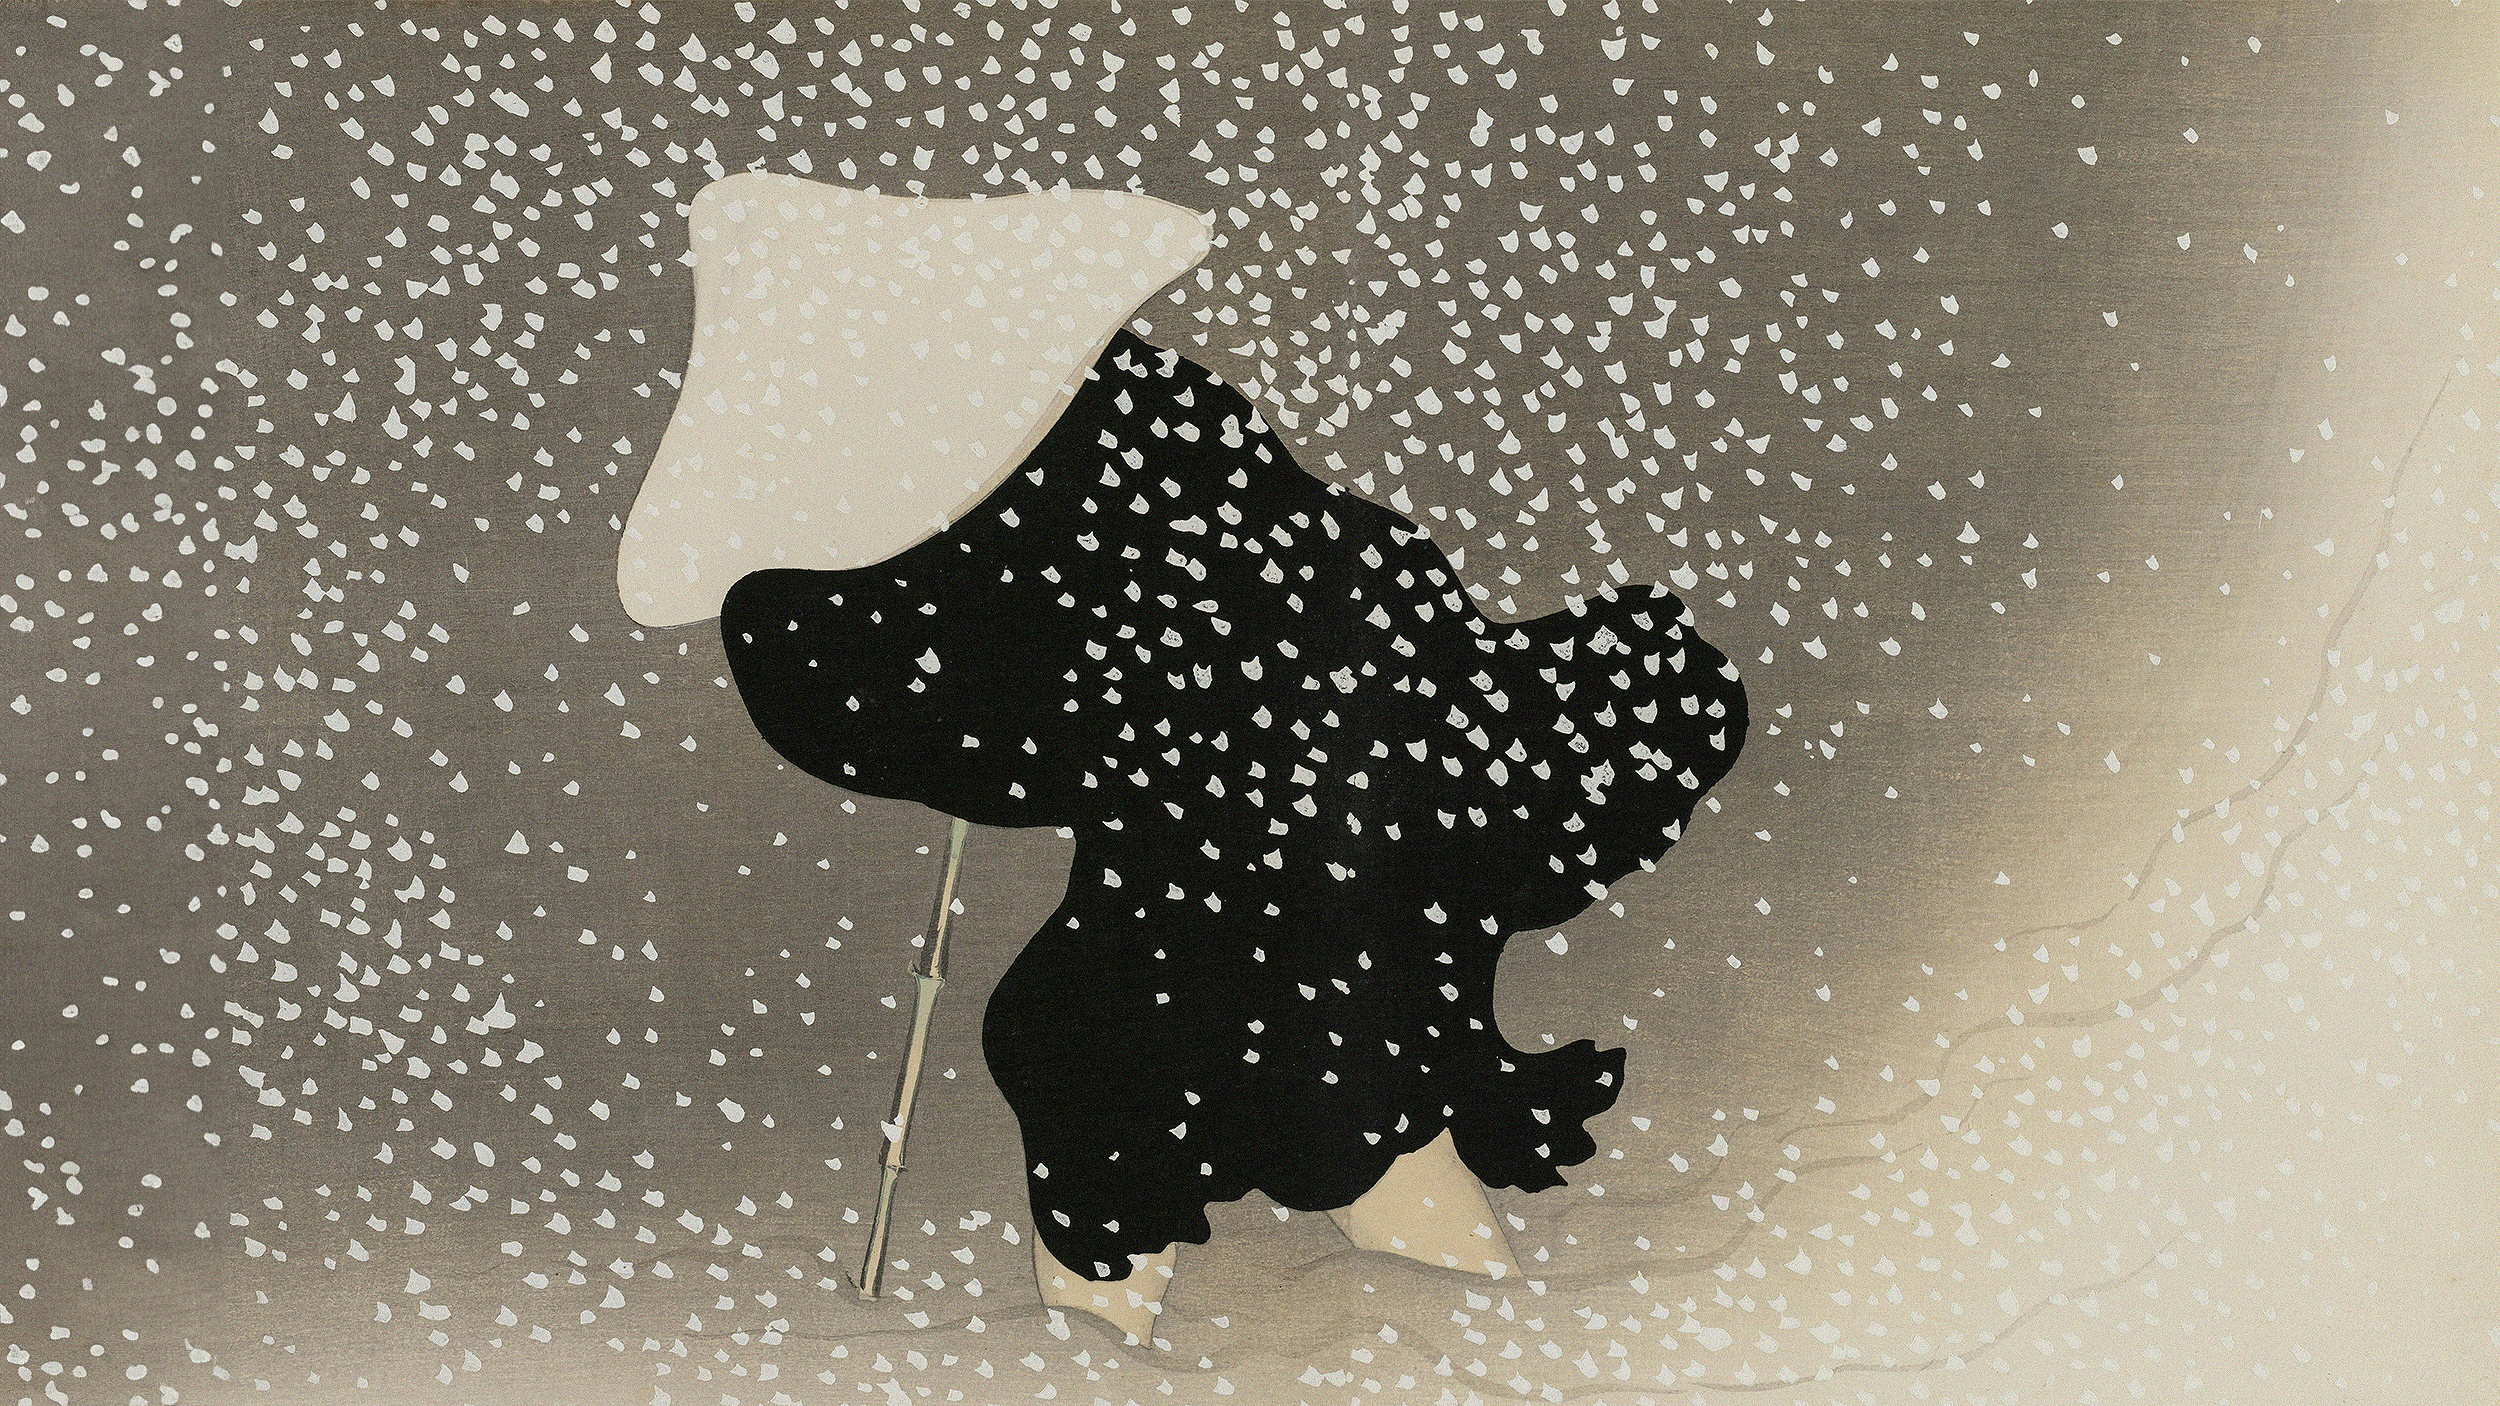 A stylized silhouette of a person under an umbrella amidst falling snow, depicted in black against a speckled beige background, embodying elements of Japanese philosophy.